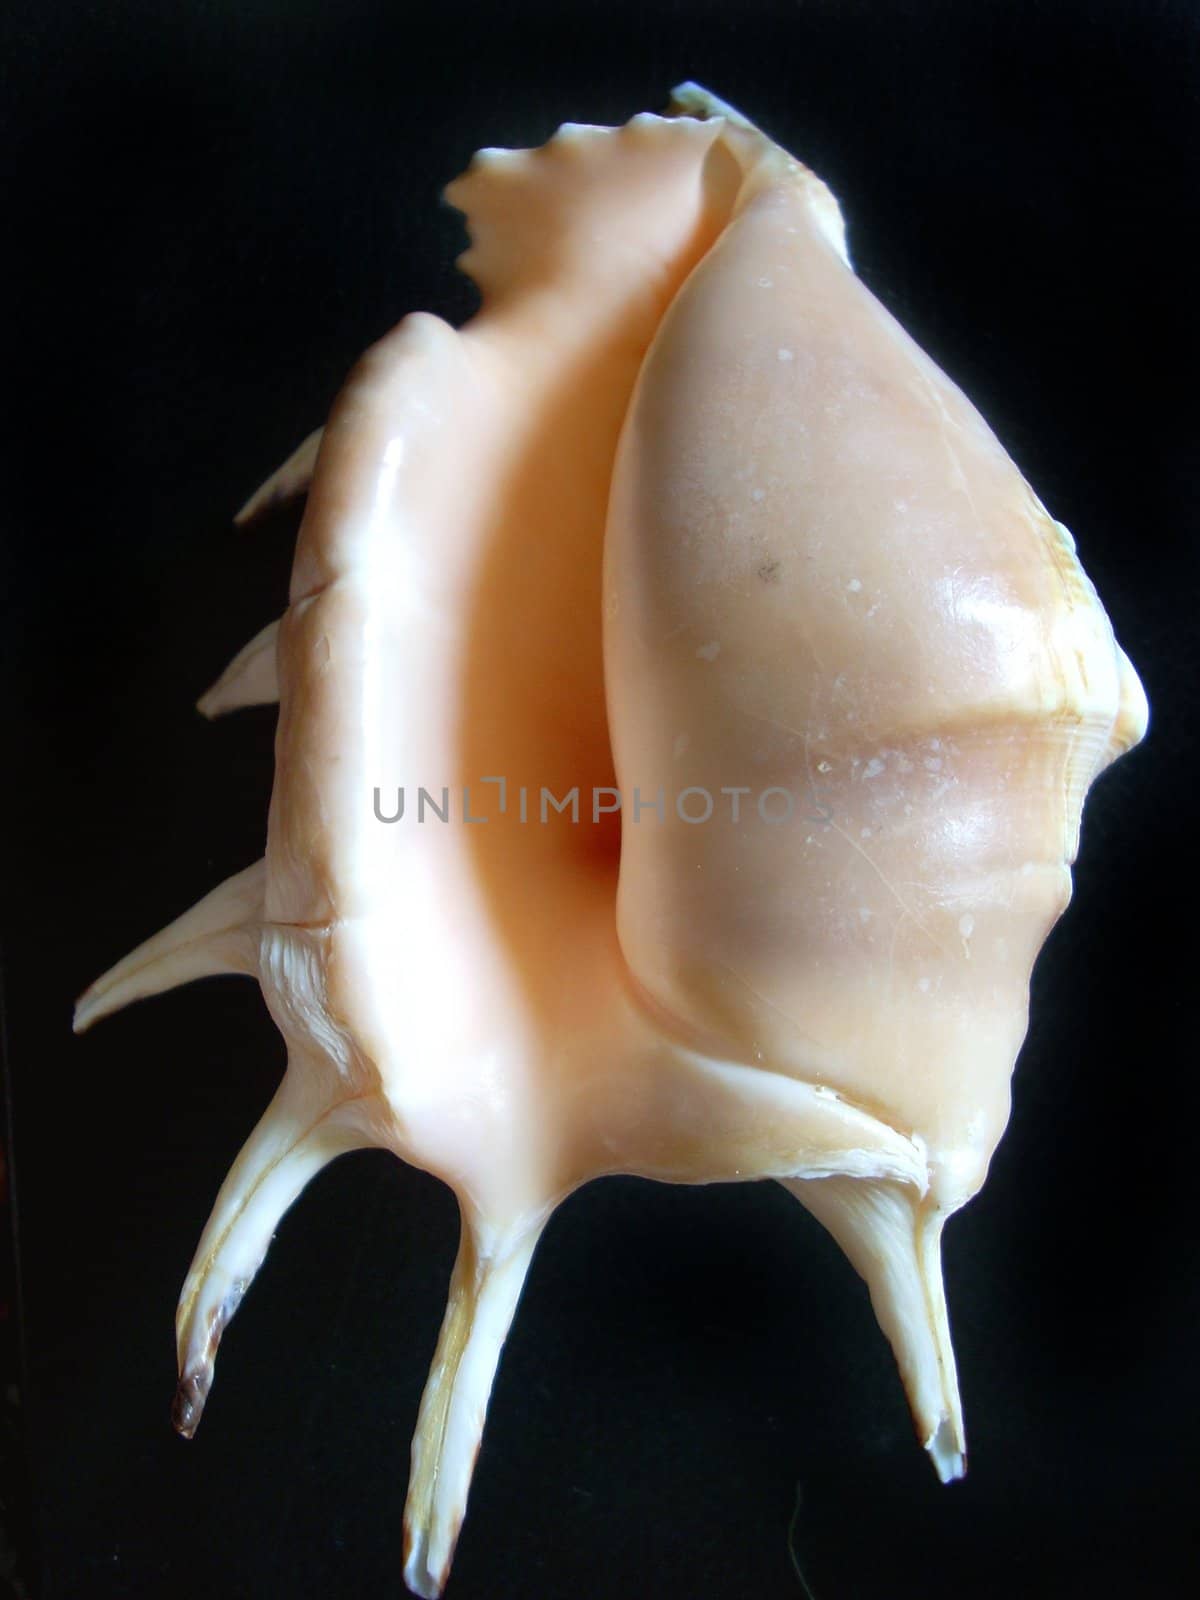 A high contract shoot of a seashell